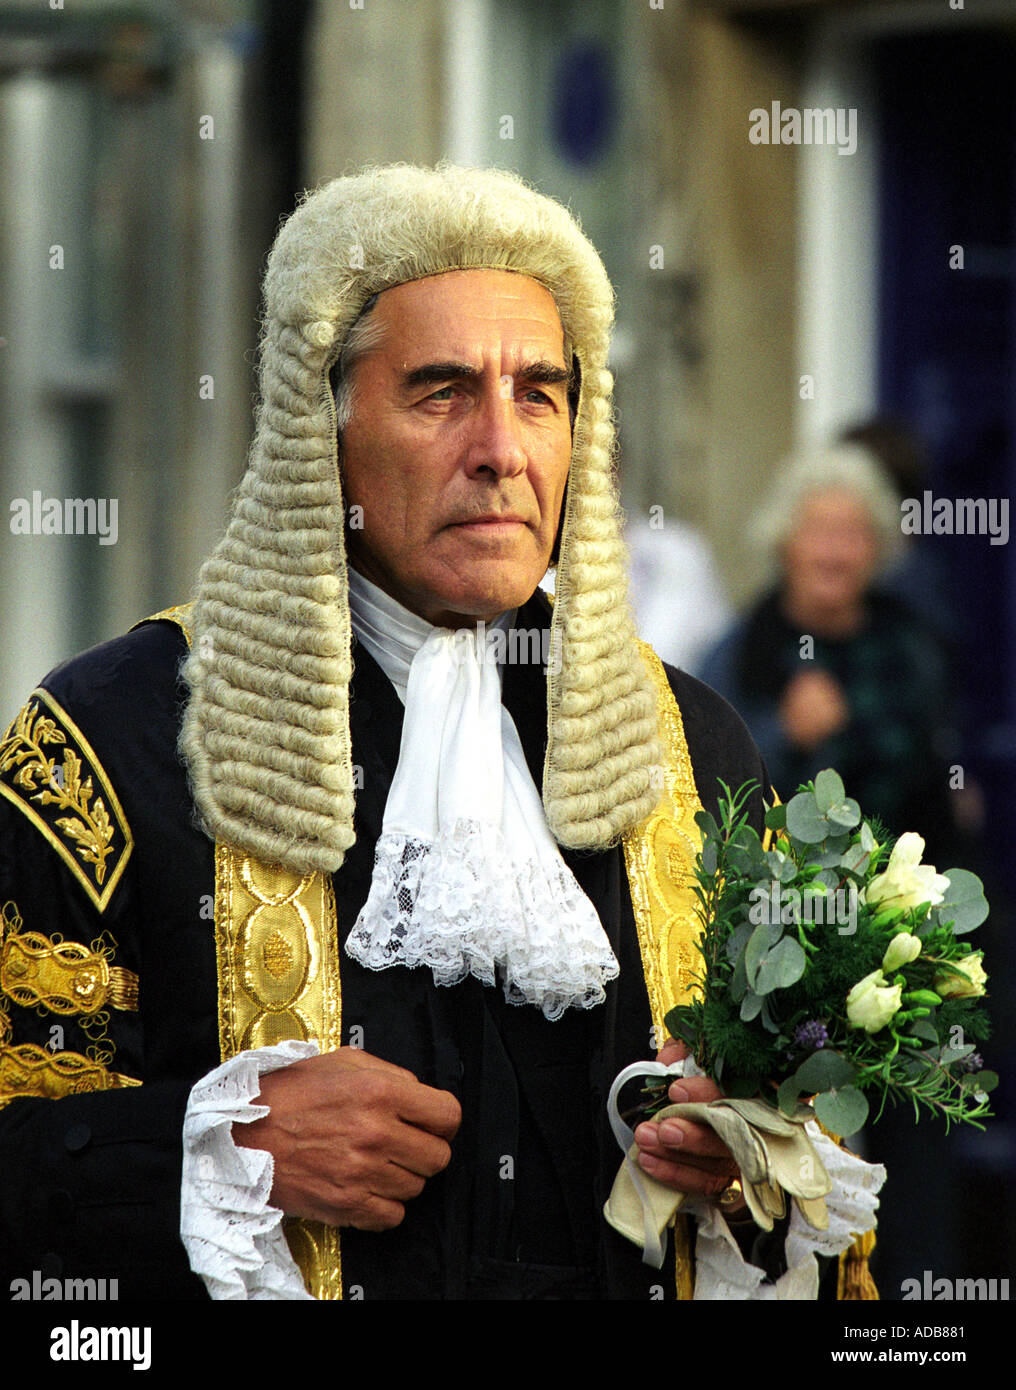 Master of the Rolls The Right Honourable Lord Phillips of Worth Matravers  England UK Stock Photo - Alamy